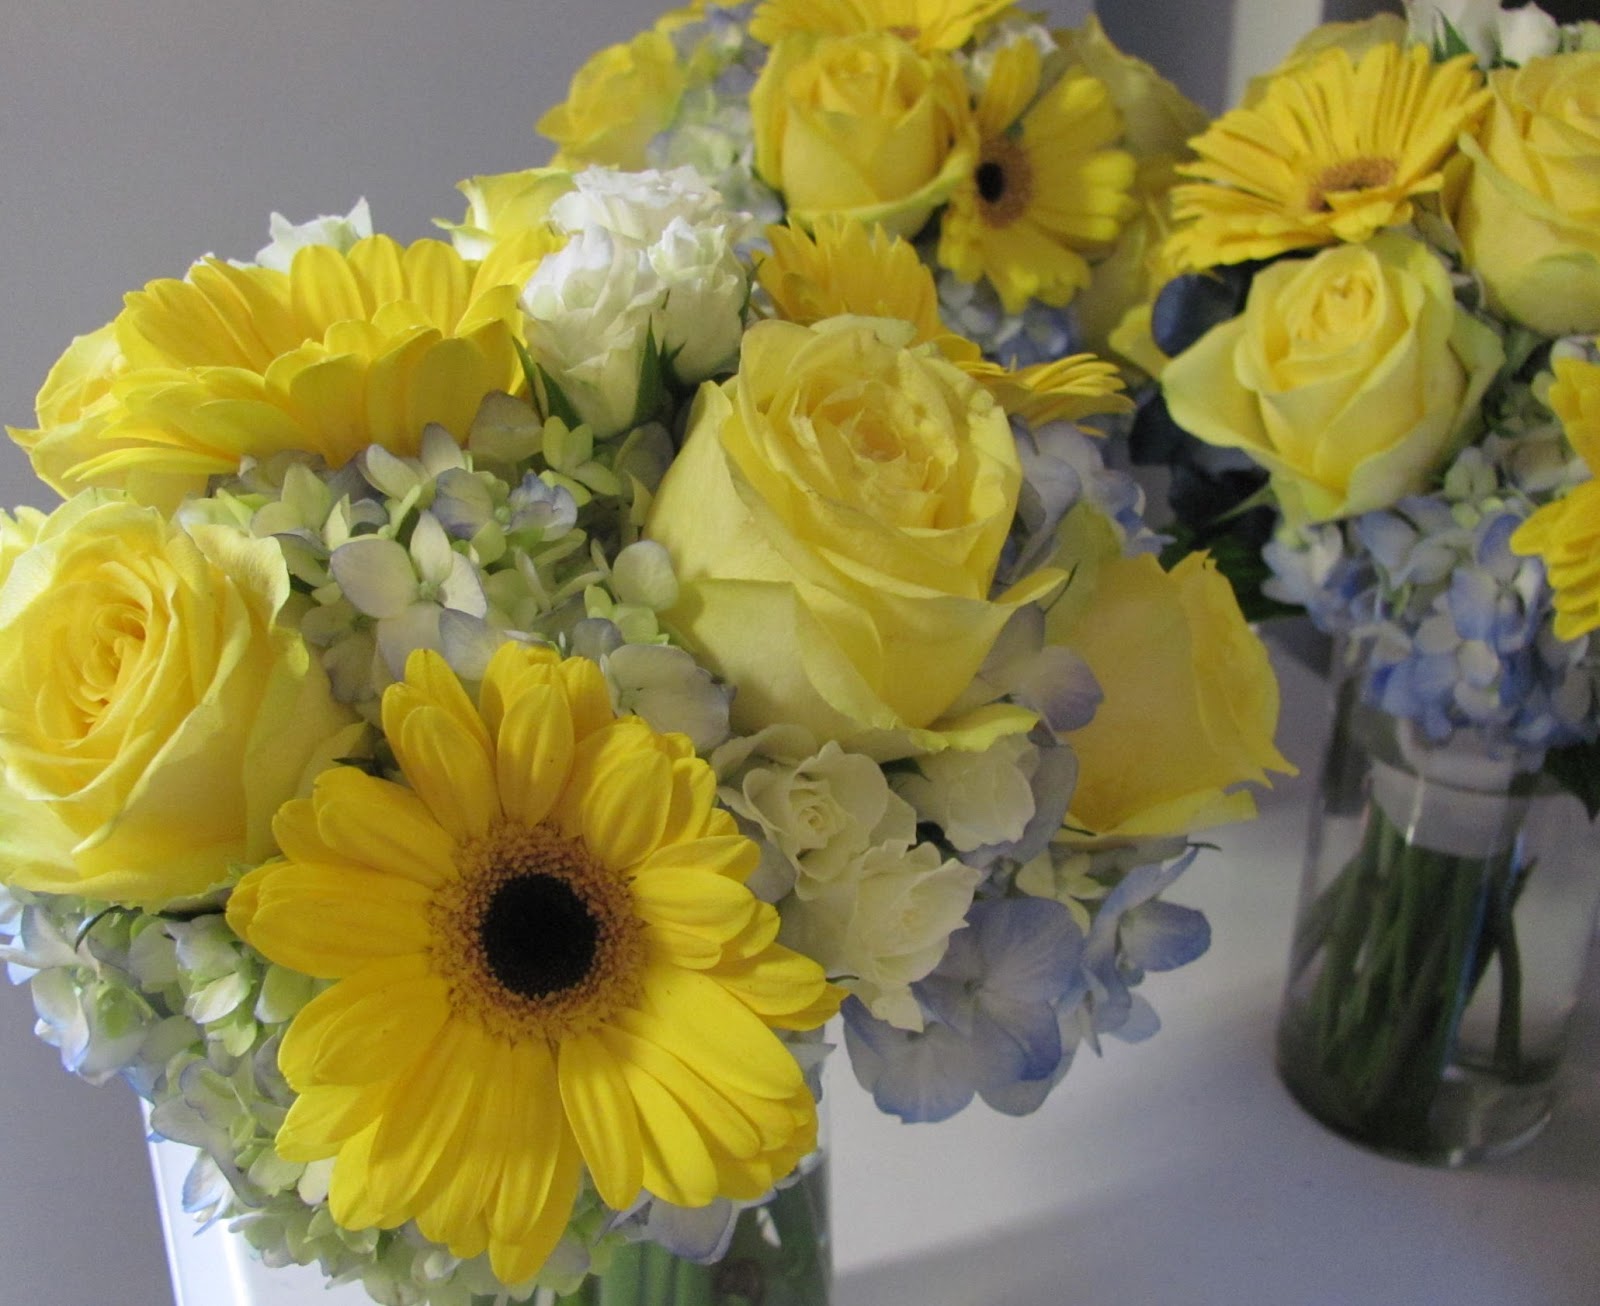 The blue and yellow bridesmaids bouquets were made of blue hydrangea,